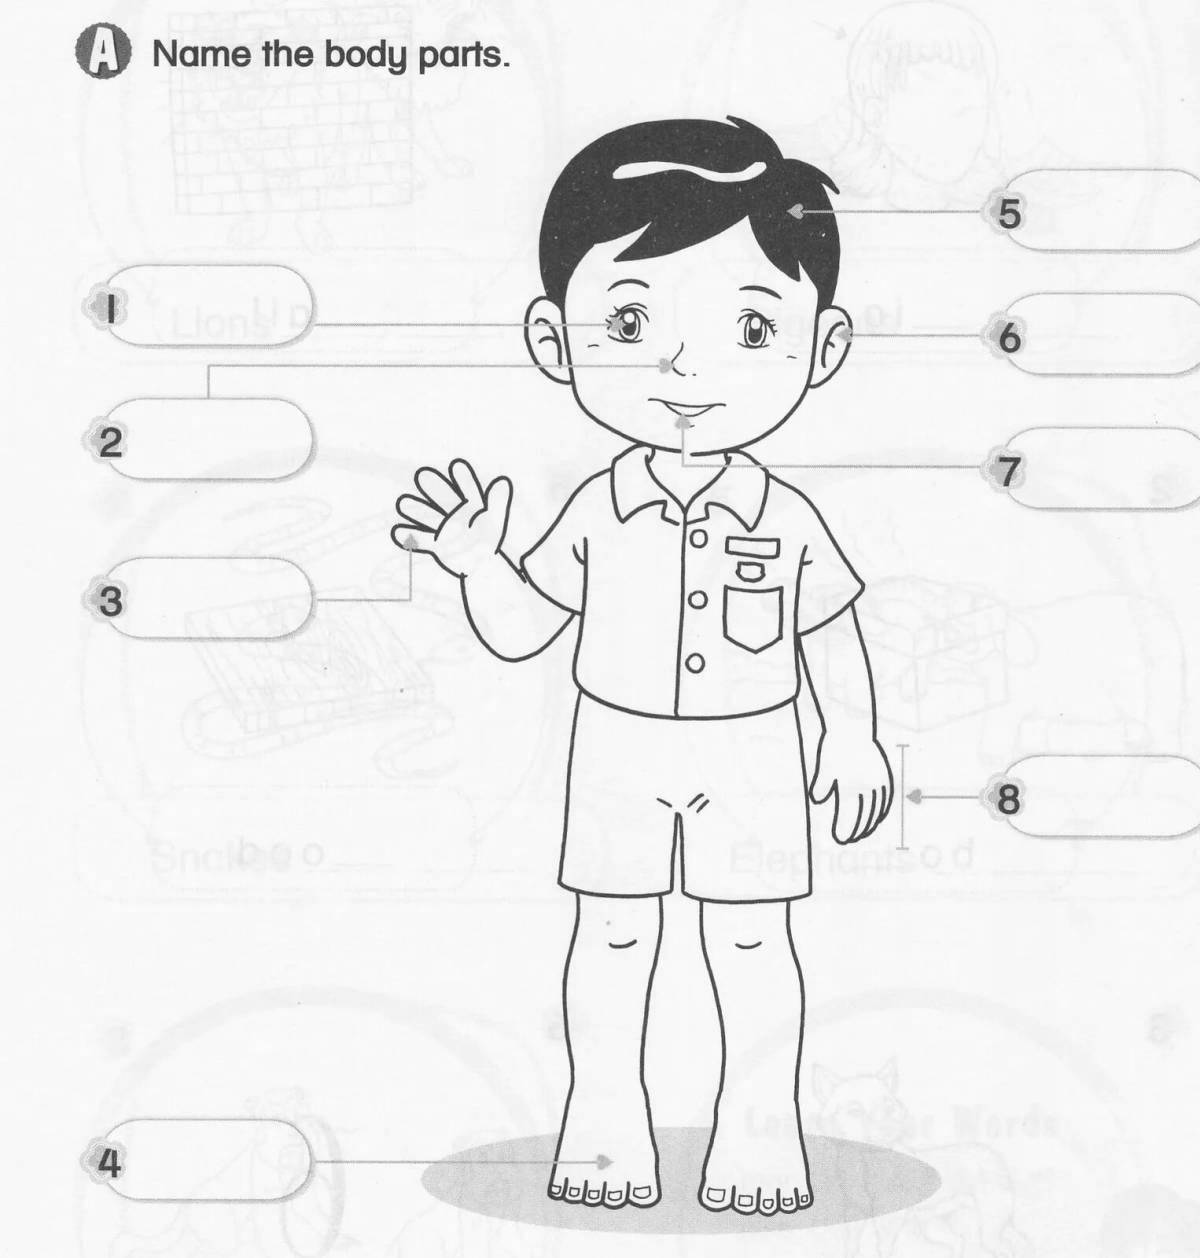 Colorful body parts coloring pages for kids